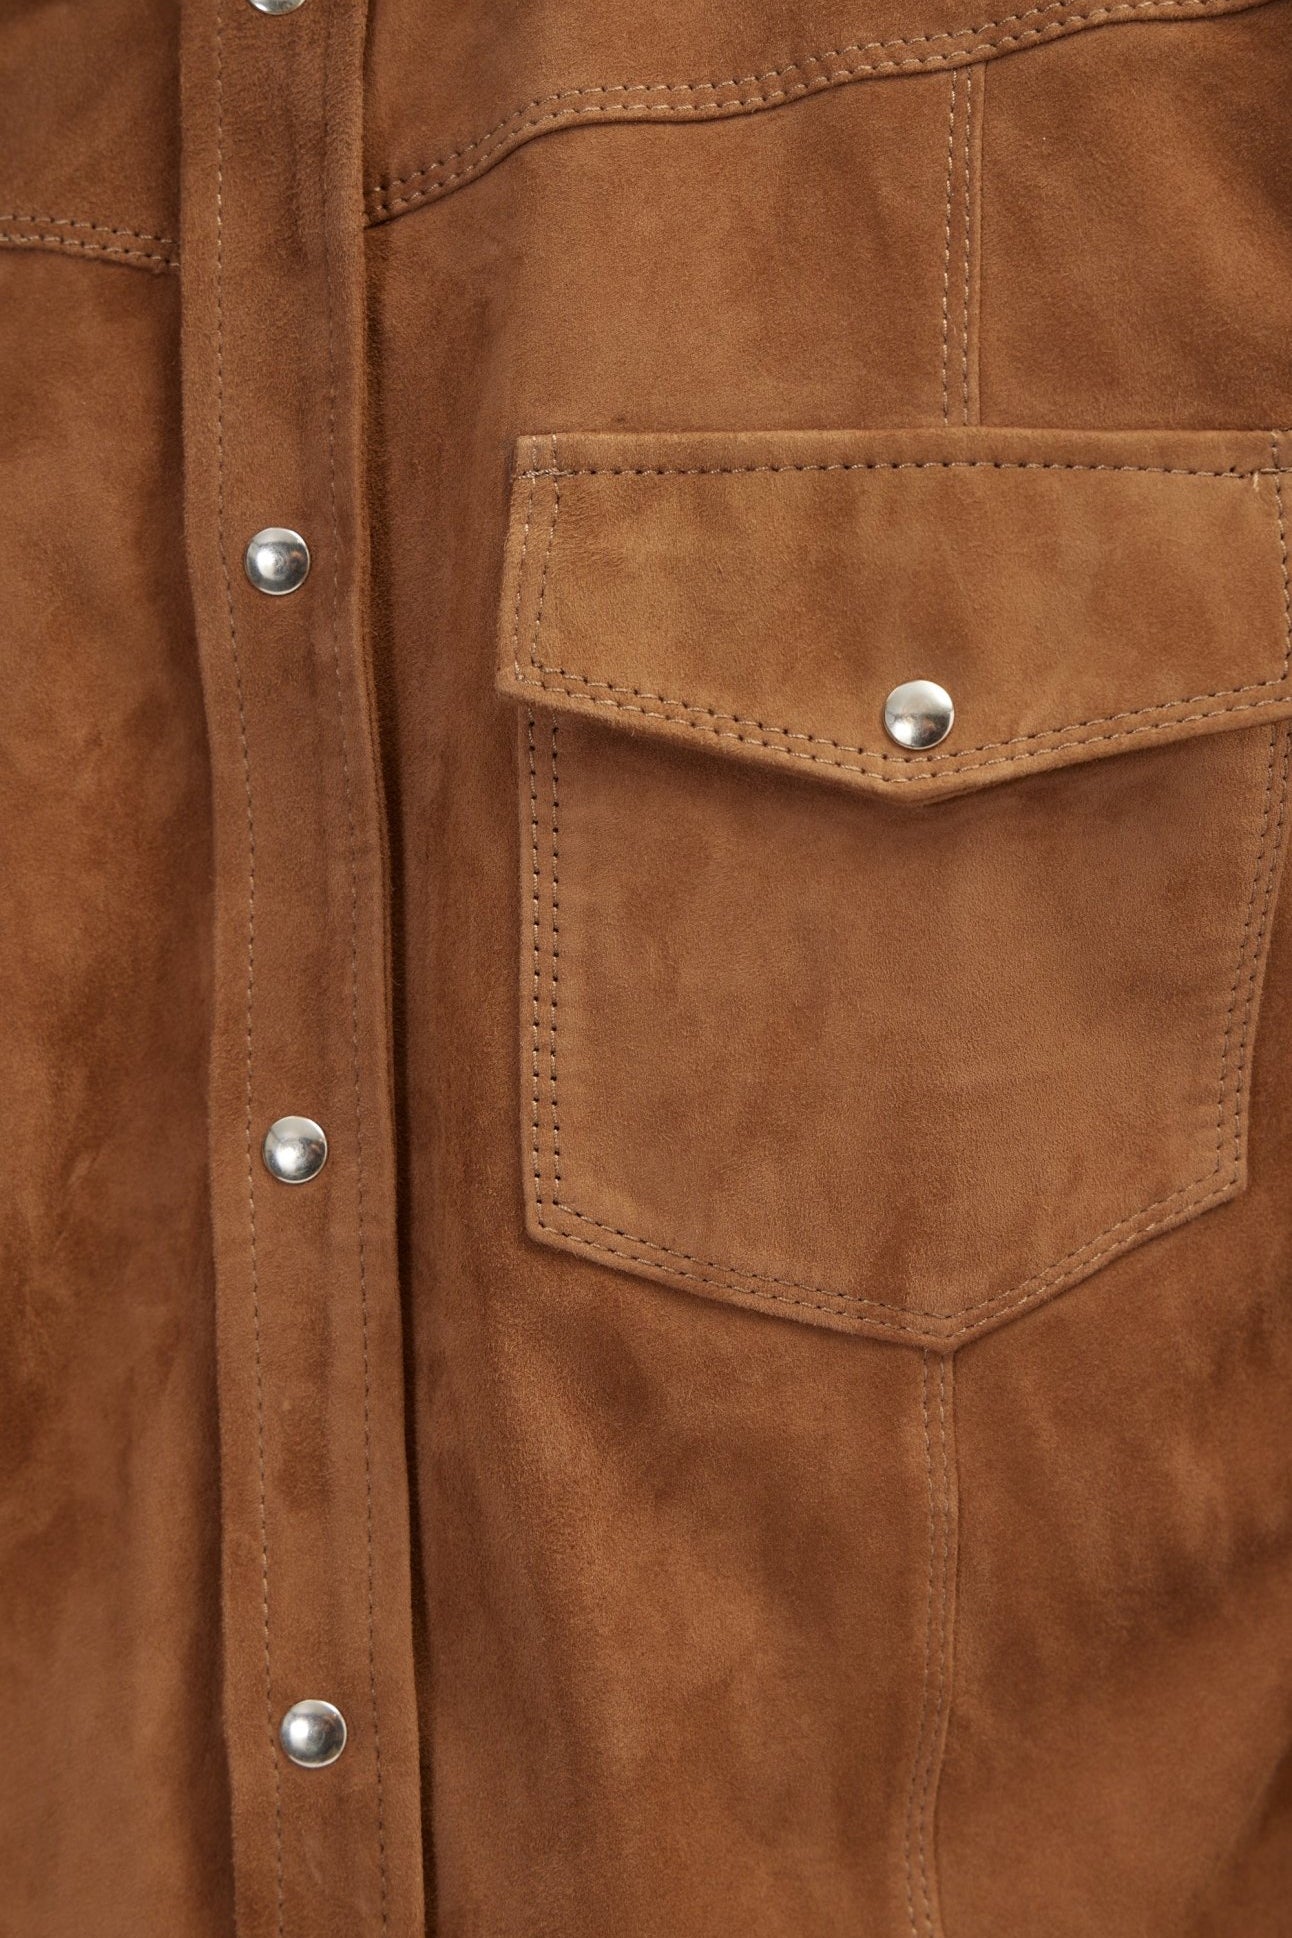 Suede Leather Shirt - Camel - Ron Tomson